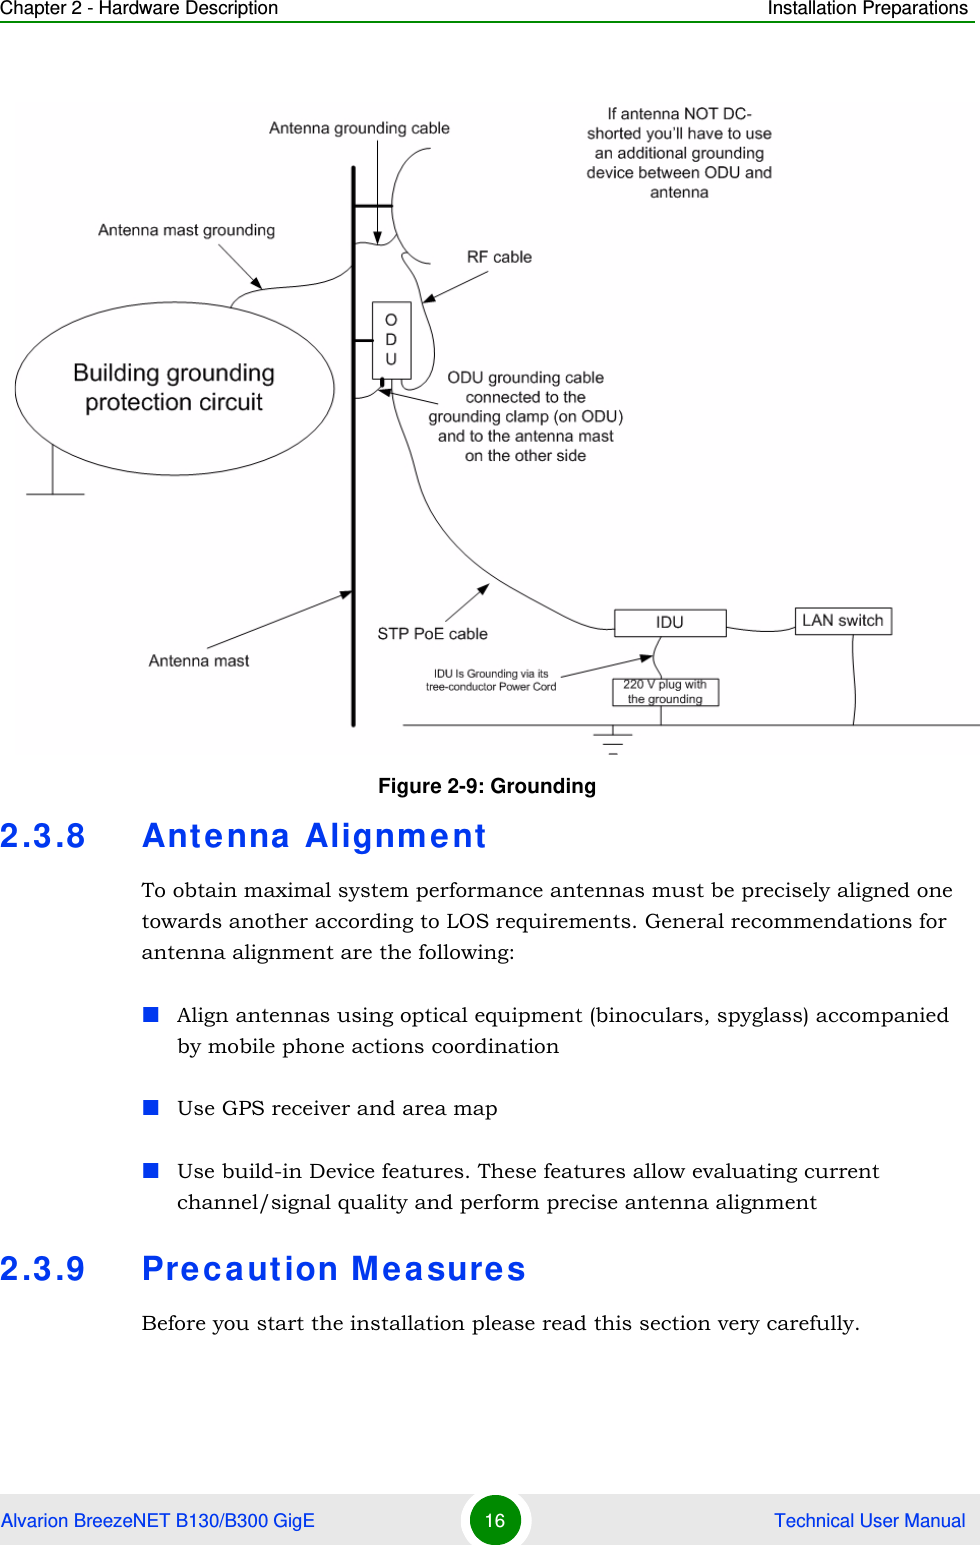 Chapter 2 - Hardware Description Installation PreparationsAlvarion BreezeNET B130/B300 GigE 16  Technical User Manual2.3.8 Antenna AlignmentTo obtain maximal system performance antennas must be precisely aligned one towards another according to LOS requirements. General recommendations for antenna alignment are the following:Align antennas using optical equipment (binoculars, spyglass) accompanied by mobile phone actions coordinationUse GPS receiver and area mapUse build-in Device features. These features allow evaluating current channel/signal quality and perform precise antenna alignment2.3.9 Precaution MeasuresBefore you start the installation please read this section very carefully. Figure 2-9: Grounding